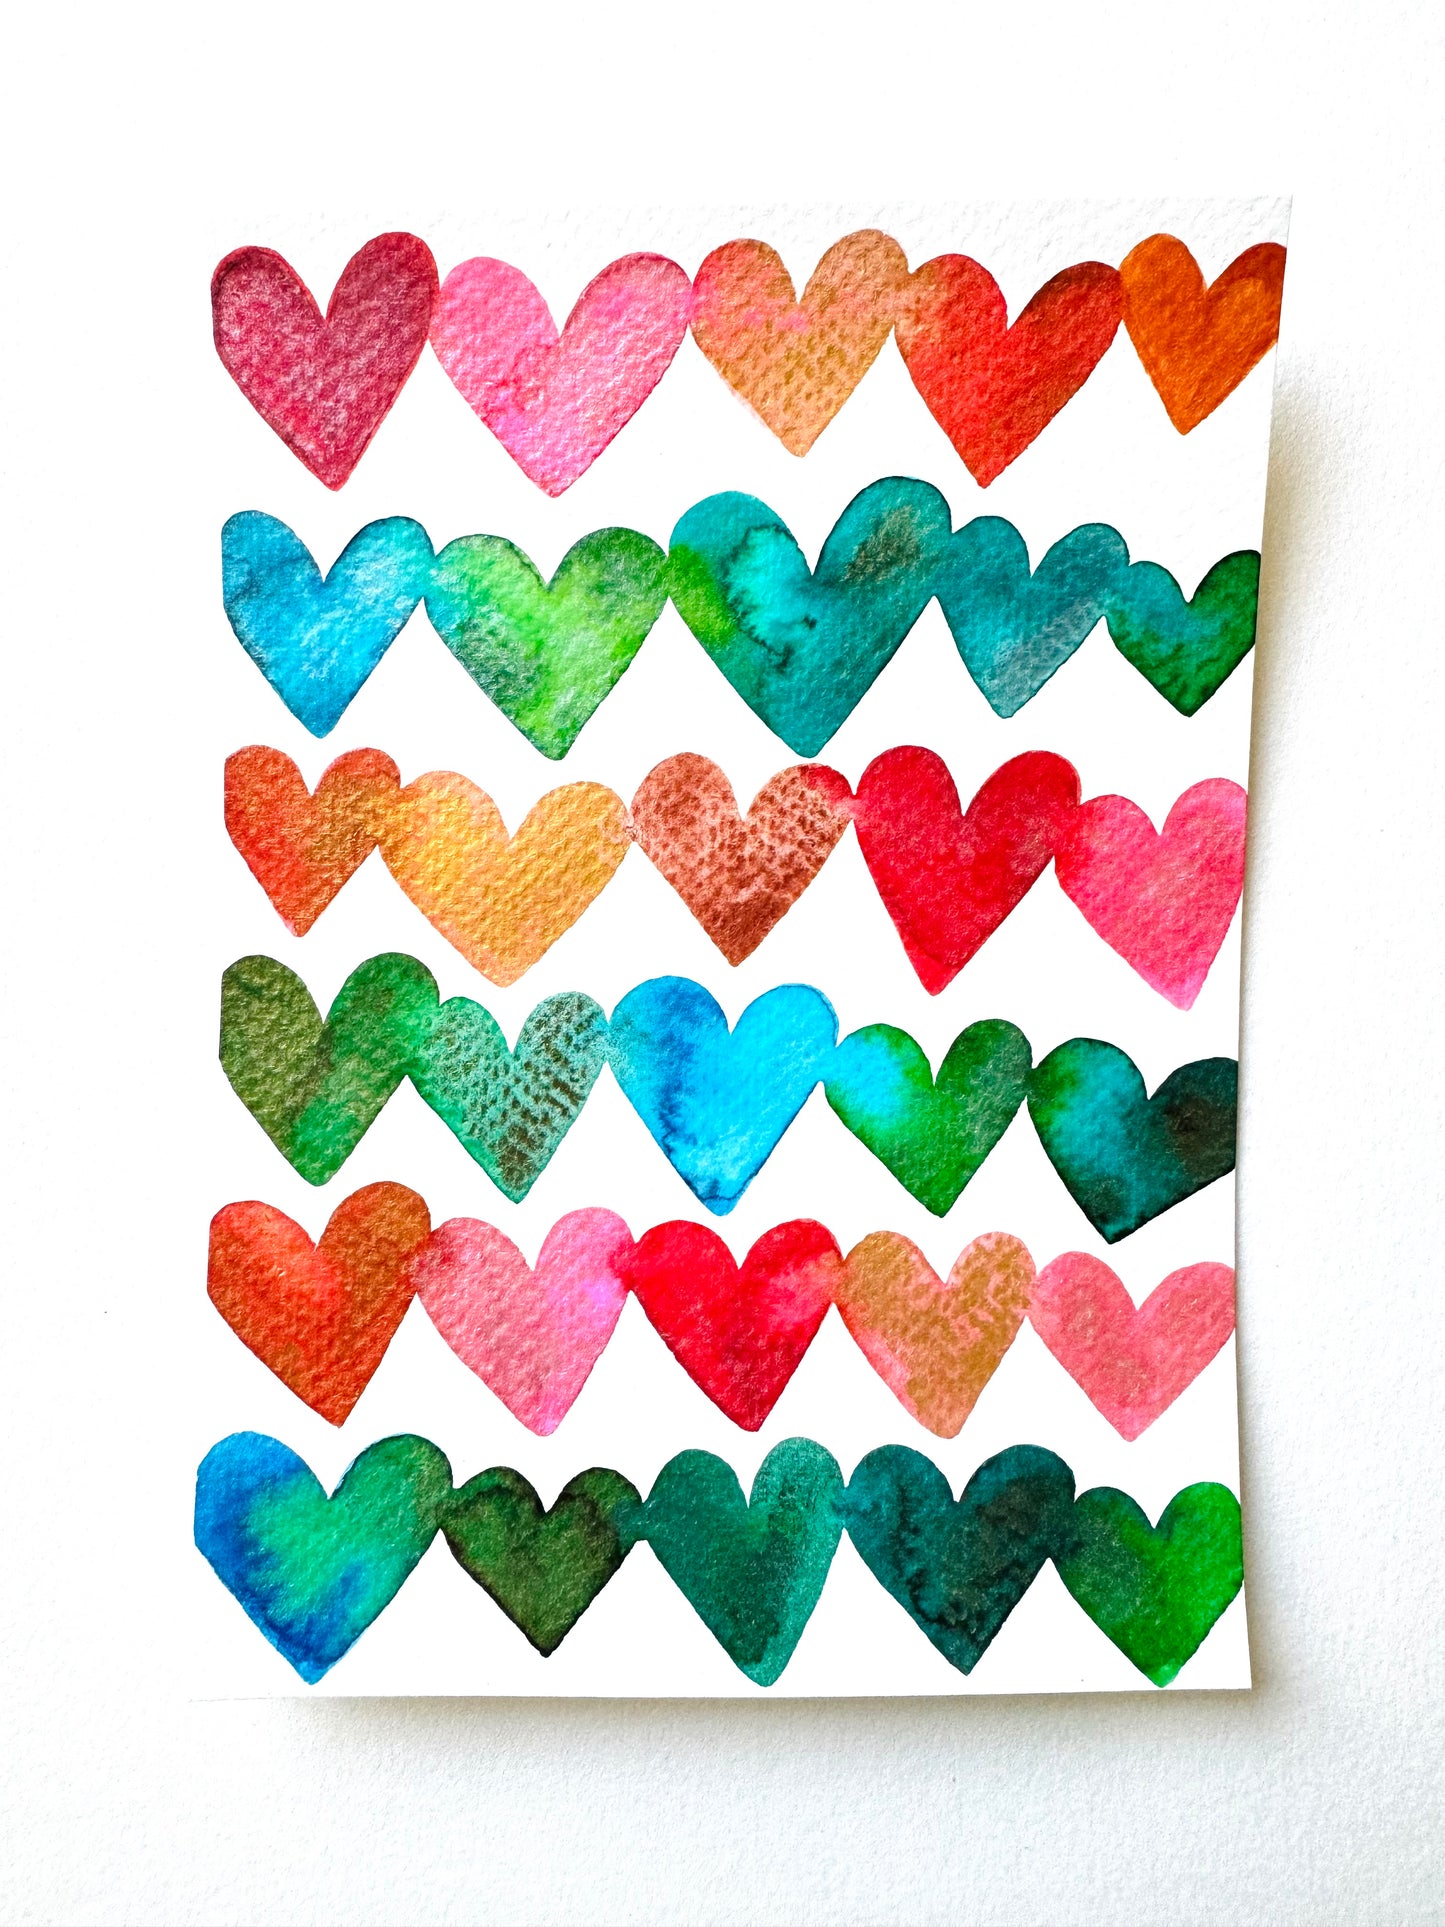 Metallic Shimmer Rainbow Watercolor Hearts Original Painting on 5x7 inch paper